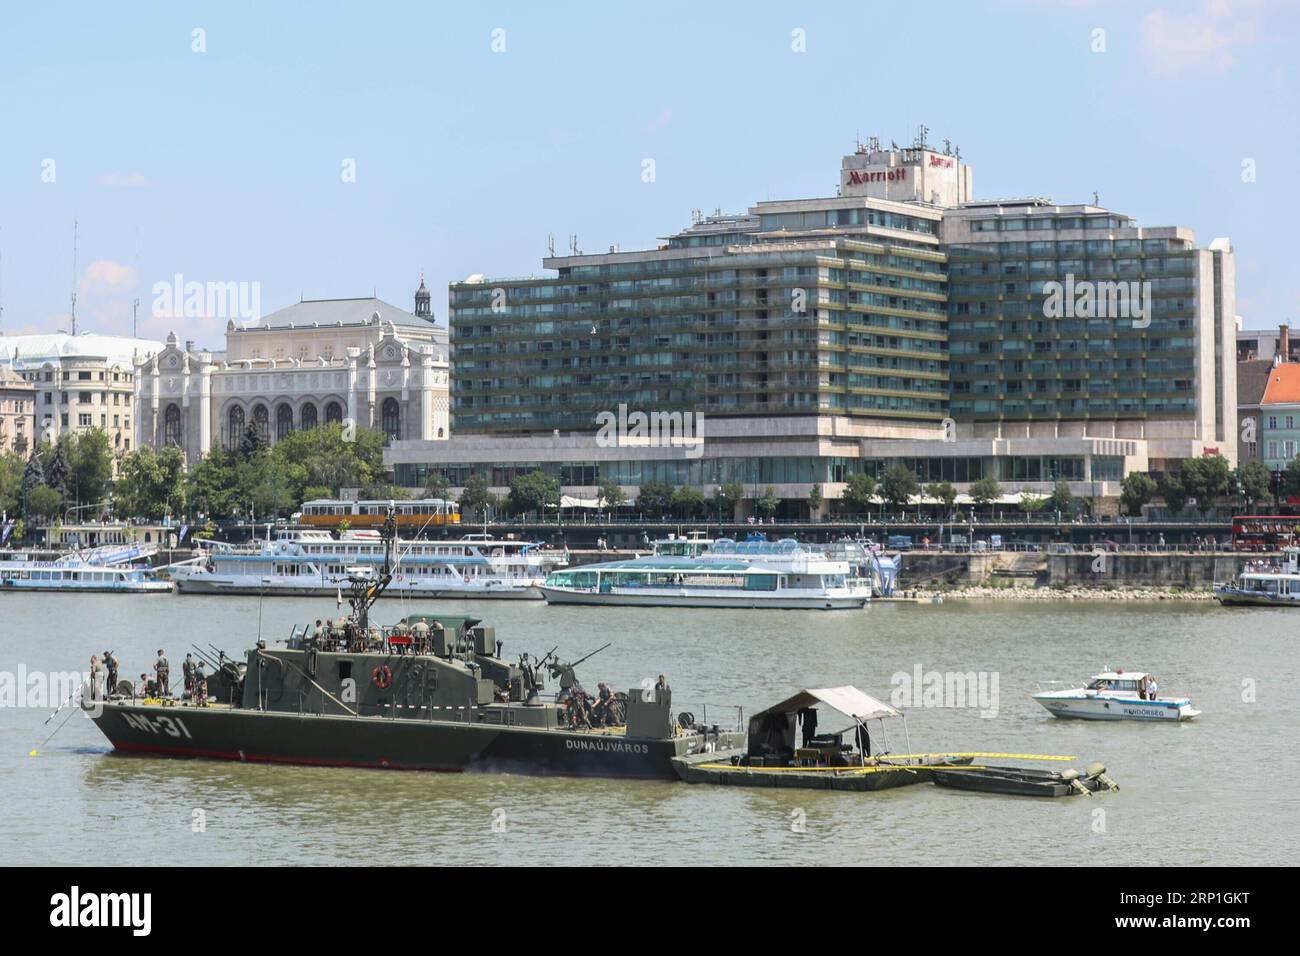 (180705) -- BUDAPEST, July 5, 2018 -- Hungarian Military Explosive Ordnance Disposal team works on Danube River to lift a 100-kilogram World War II bomb from the riverbed in Budapest, Hungary, July 5, 2018. The bomb, which was discovered in the riverbed on July 2, was defused and shipped to the port of Ujpest in northern Budapest. ) HUNGARY-BUDAPEST-WORLD WAR II BOMB-REMOVAL CsabaxDomotor PUBLICATIONxNOTxINxCHN Stock Photo